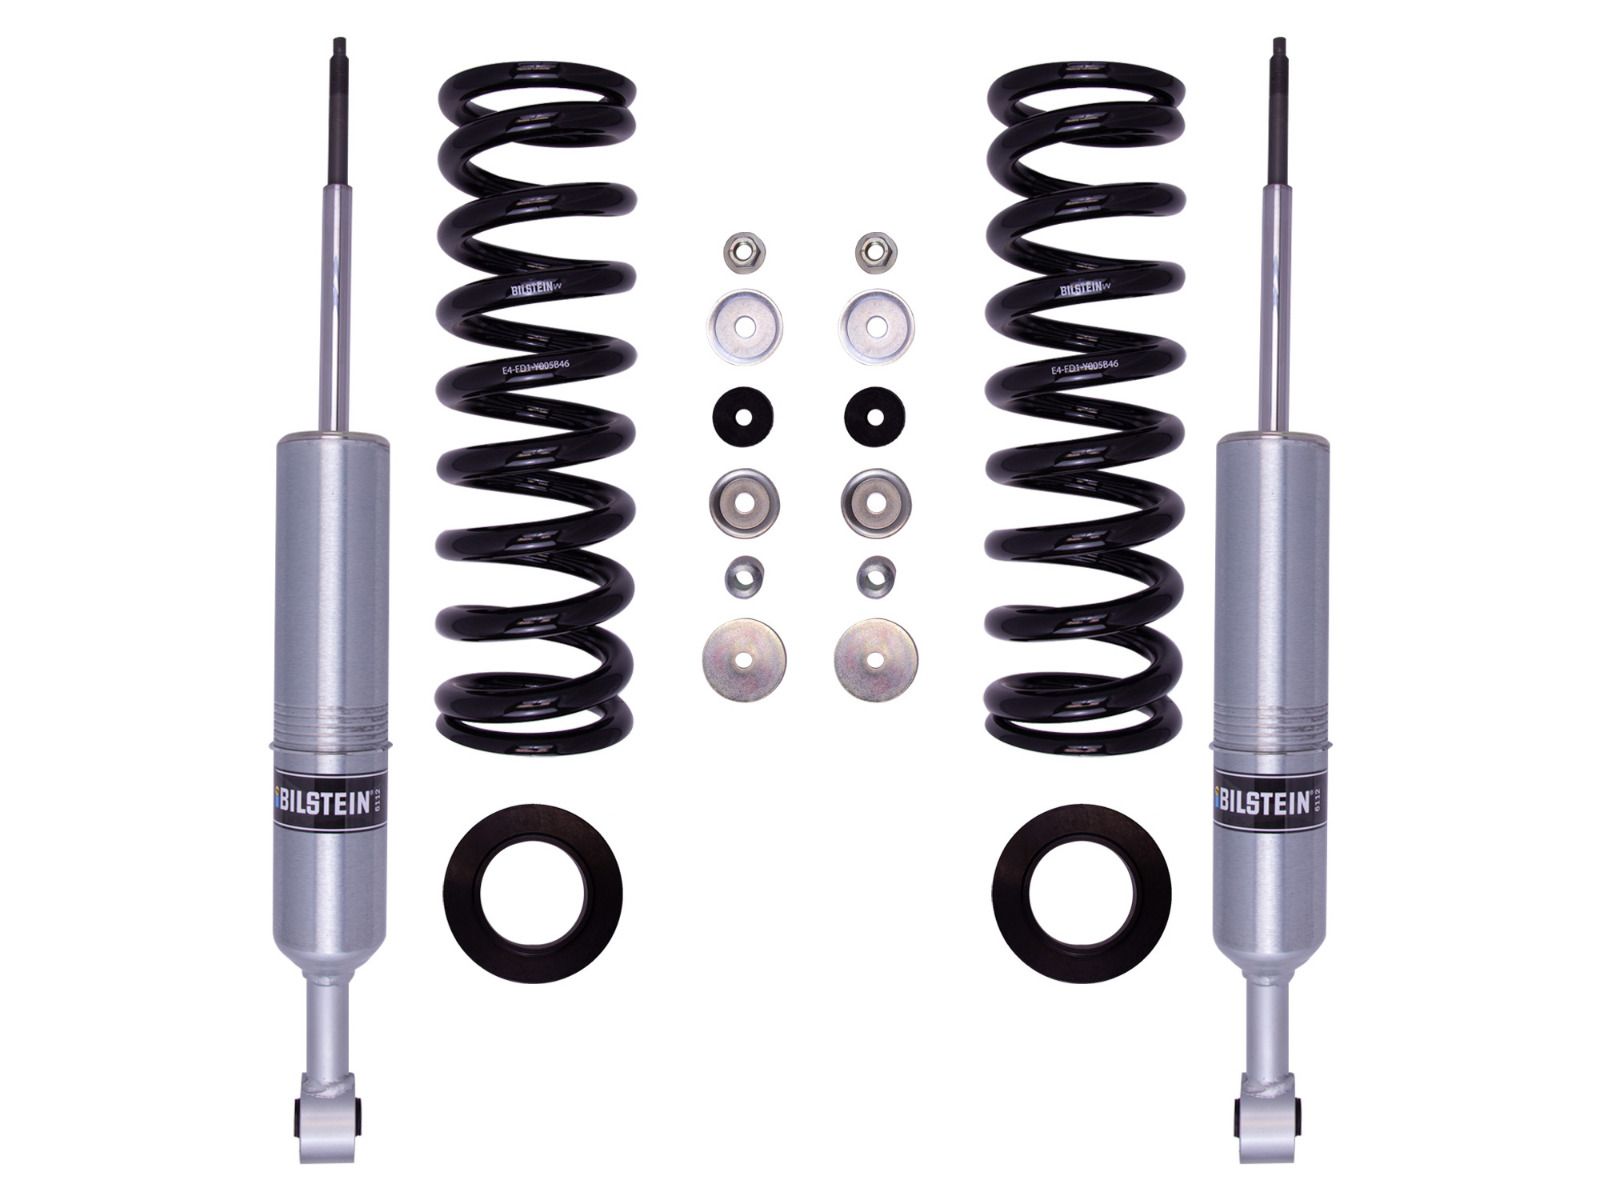 FJ Cruiser 2007-2009 Toyota 4wd - Bilstein Front 6112 Series Coil-Over Kit (Adjustable Height 2.1"-3.1" Front Lift, for additional 150-200 lbs of front weight)